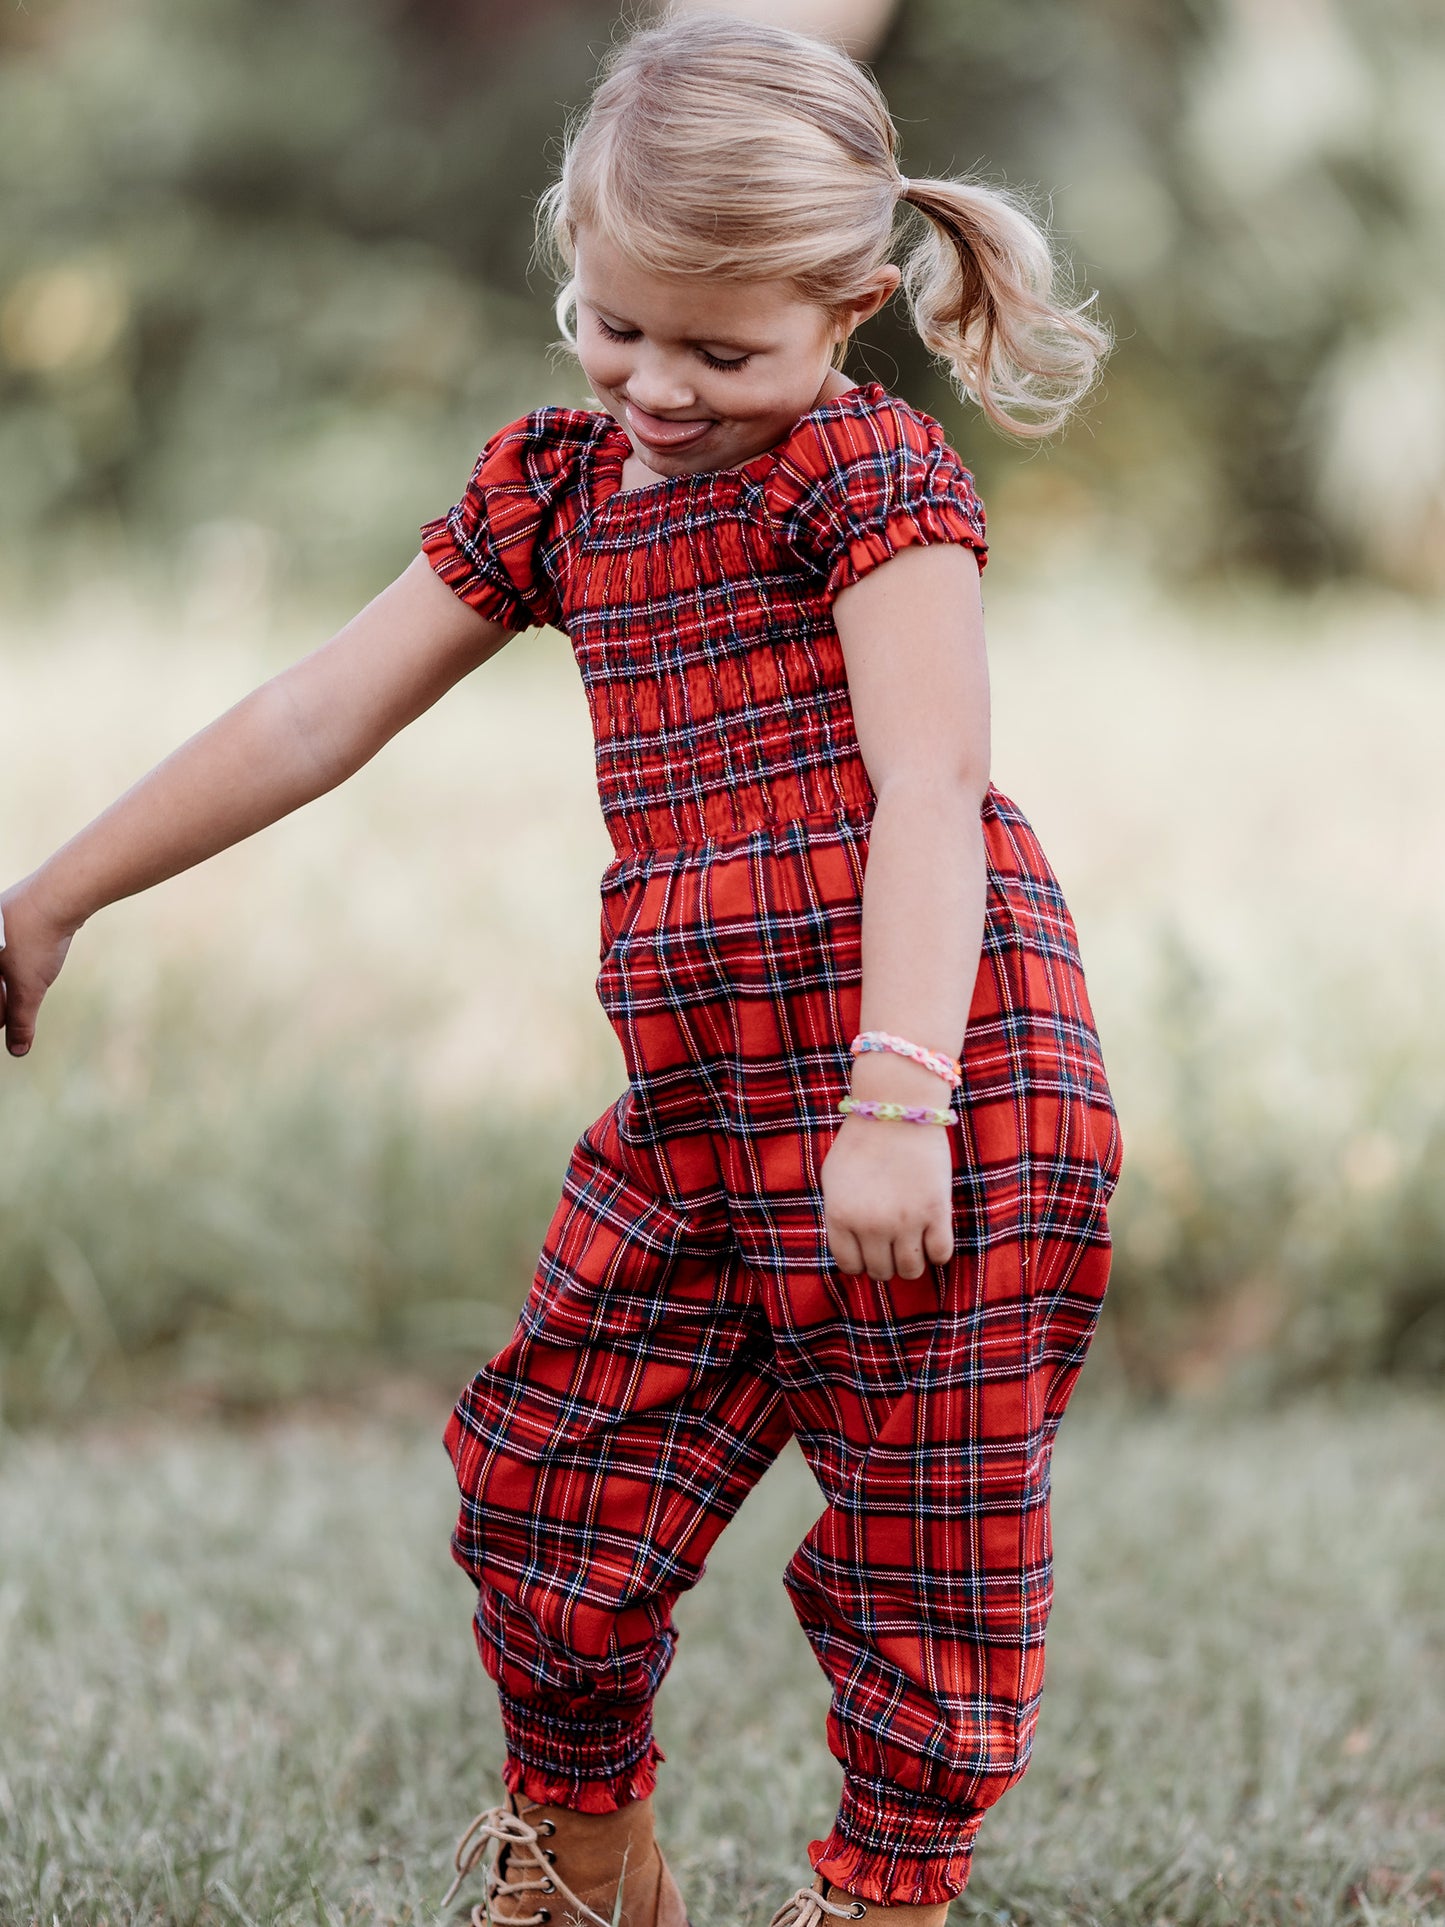 This image of a girl features the product Smocked Romper - Holiday Red Plaid. It comes in a red plaid pattern with accents of white, green, blue, and yellow.